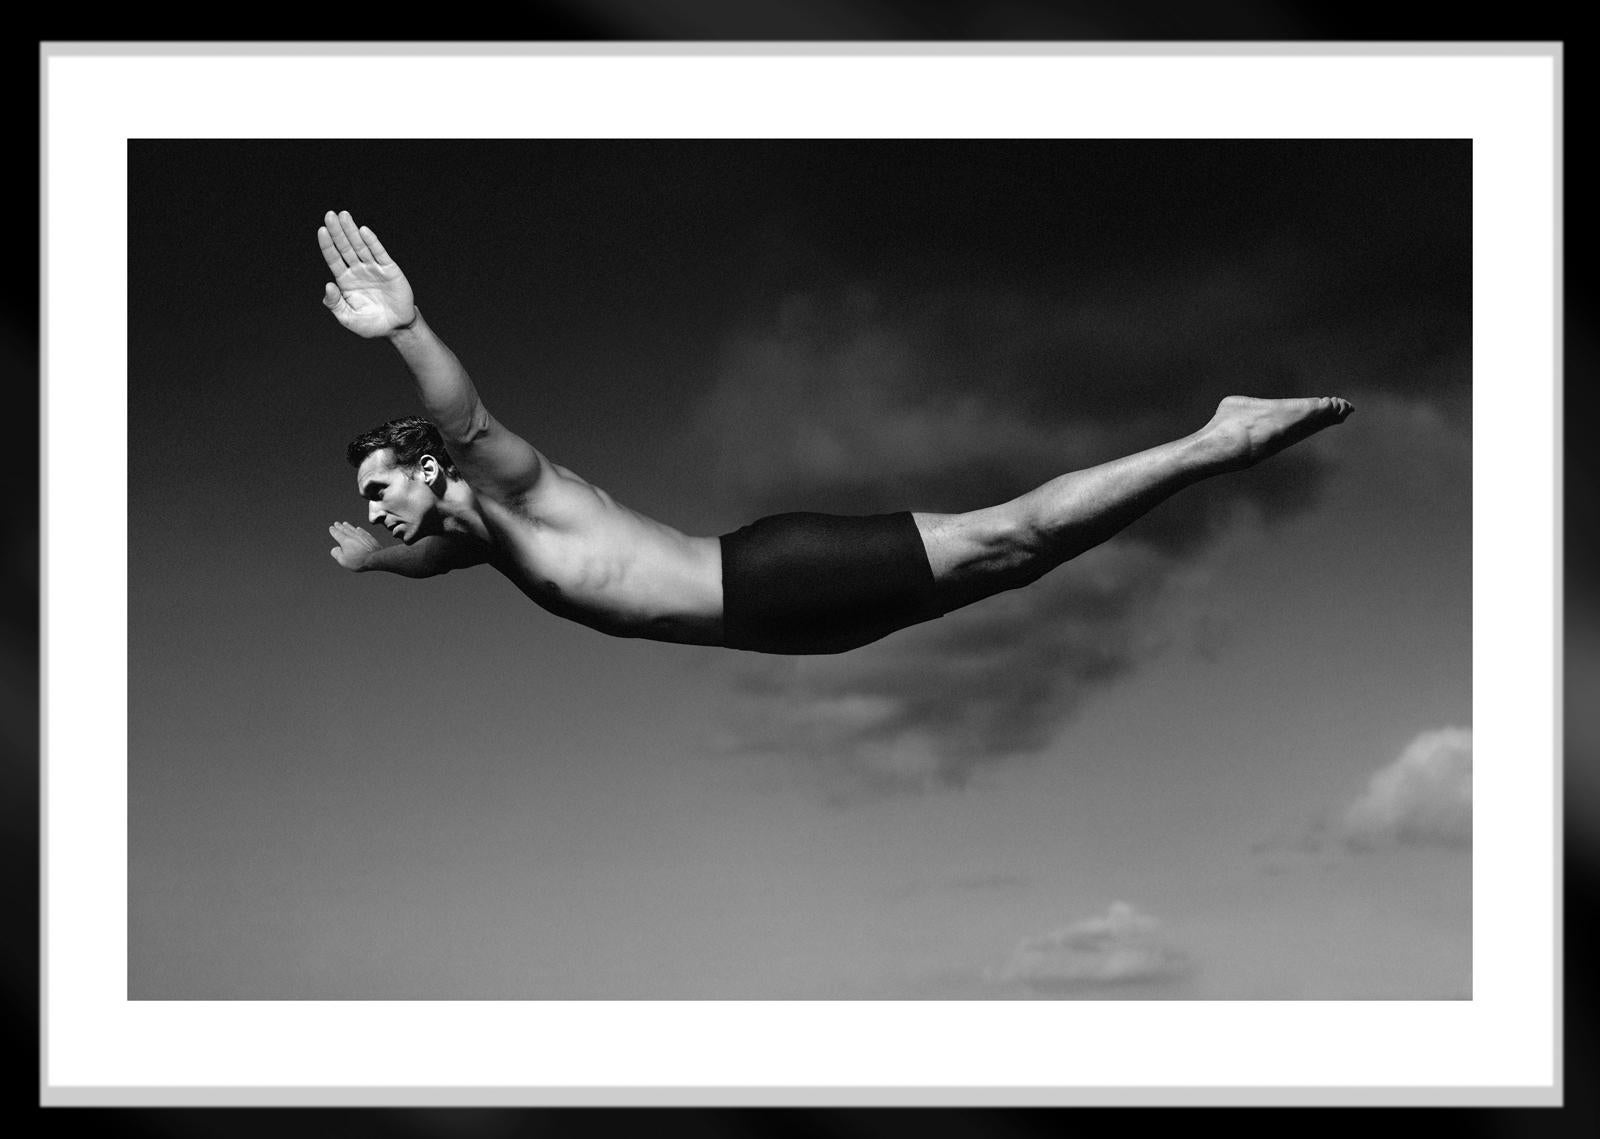  Diver -   Signed limited edition archival pigment print, 2002  -  Edition of 5
Provenance : Ian Sanderson’s Estate

Powerful photo of a man diving, in profile.

This is an Archival Pigment print on fiber based paper ( Hahnemühle Photo Rag® Baryta